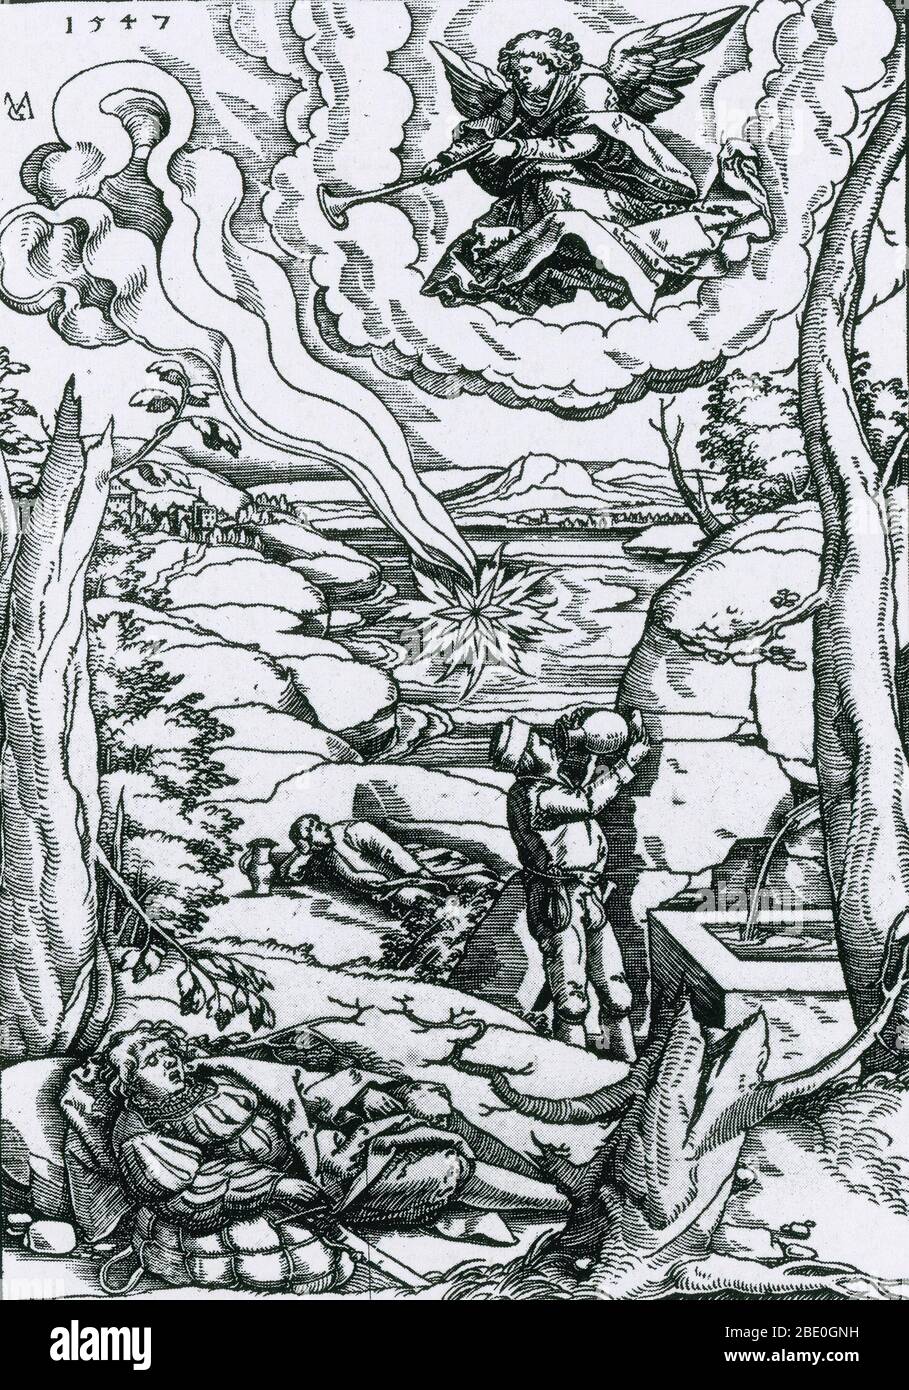 Matthias Gerung, Apocalypse Illustration, 1547, woodcut. This print depicts the Star Wormwood from Revelation 8:10-11: 'And the third angel sounded and there fell a great star from heaven burning as it were a lamp.... and the name of the star is called Wormwood.' Stock Photo